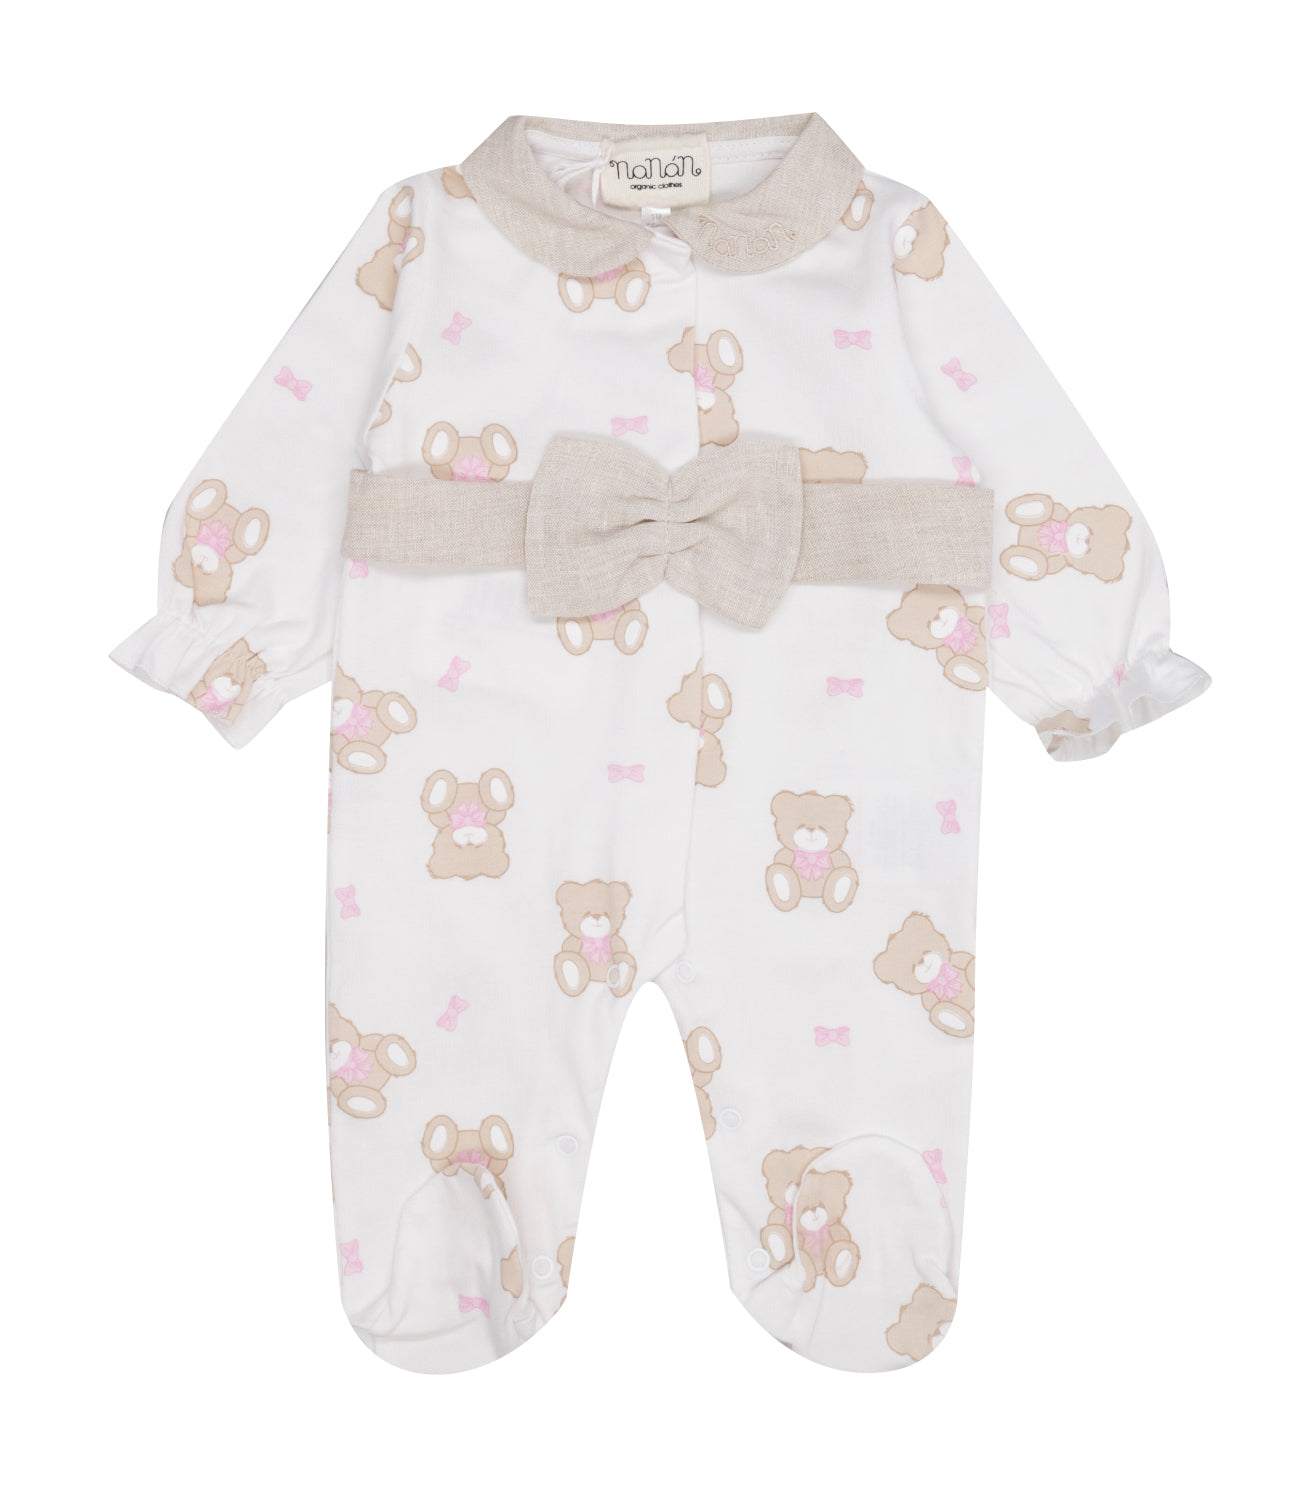 Nanan | White and Beige Sleepsuit